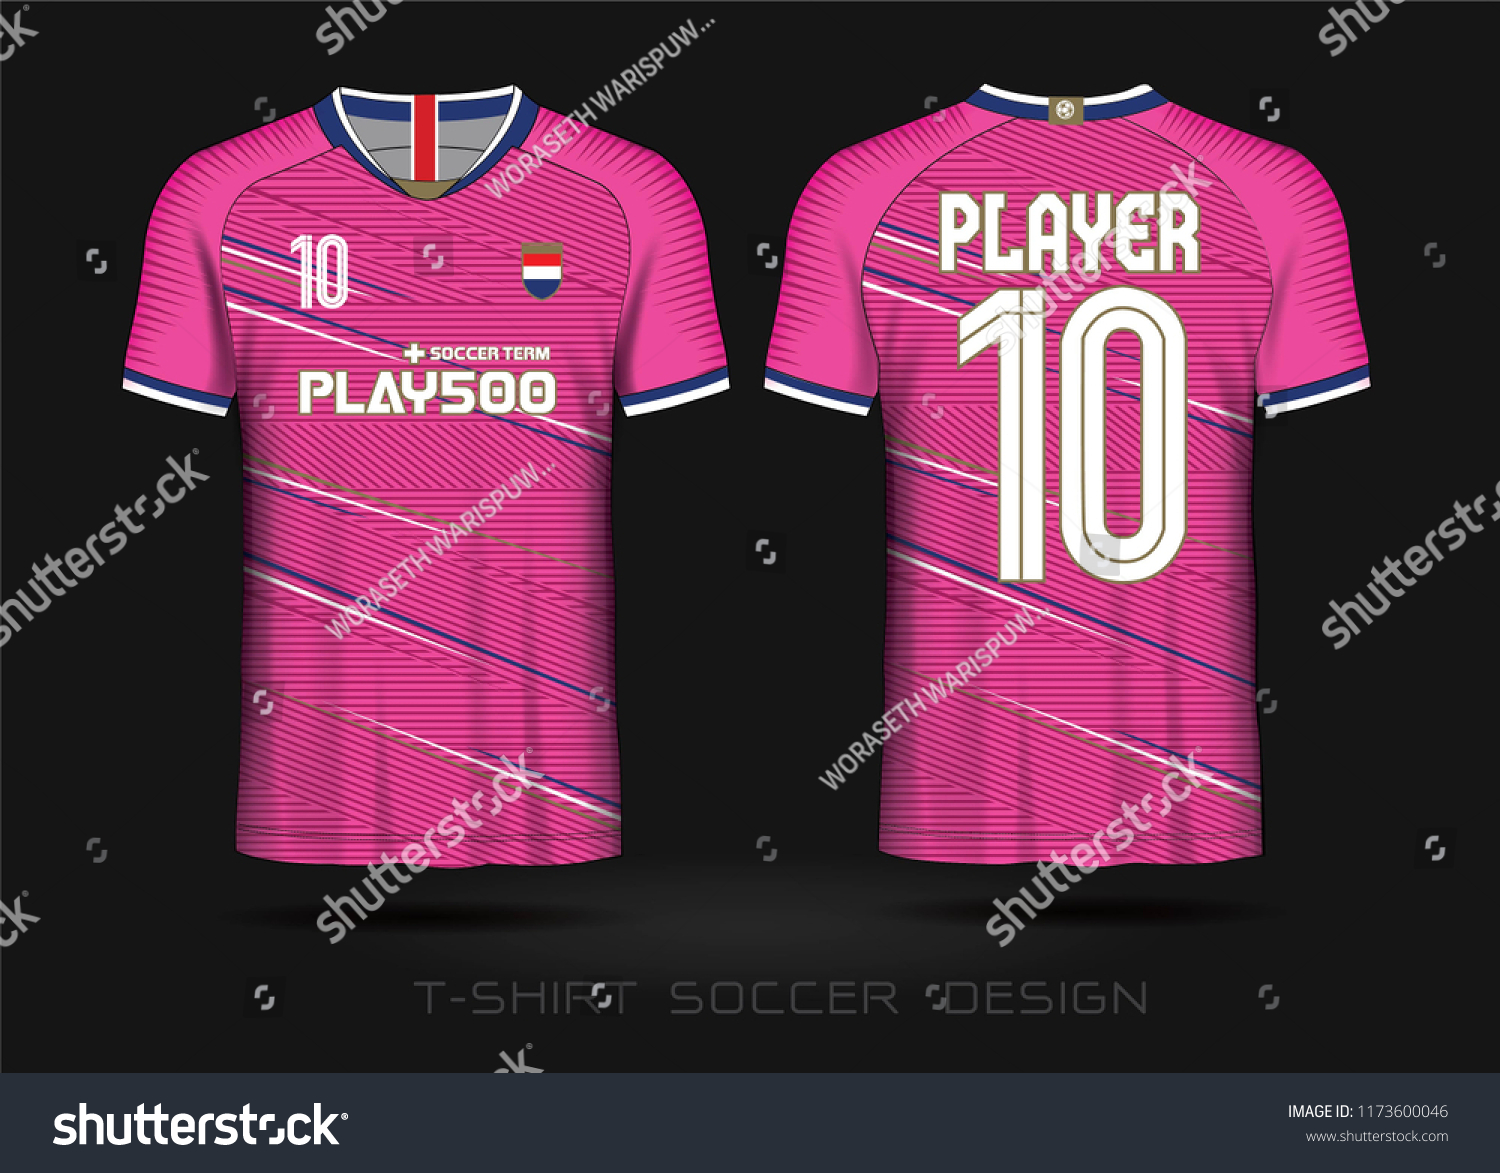 pink and blue soccer jerseys